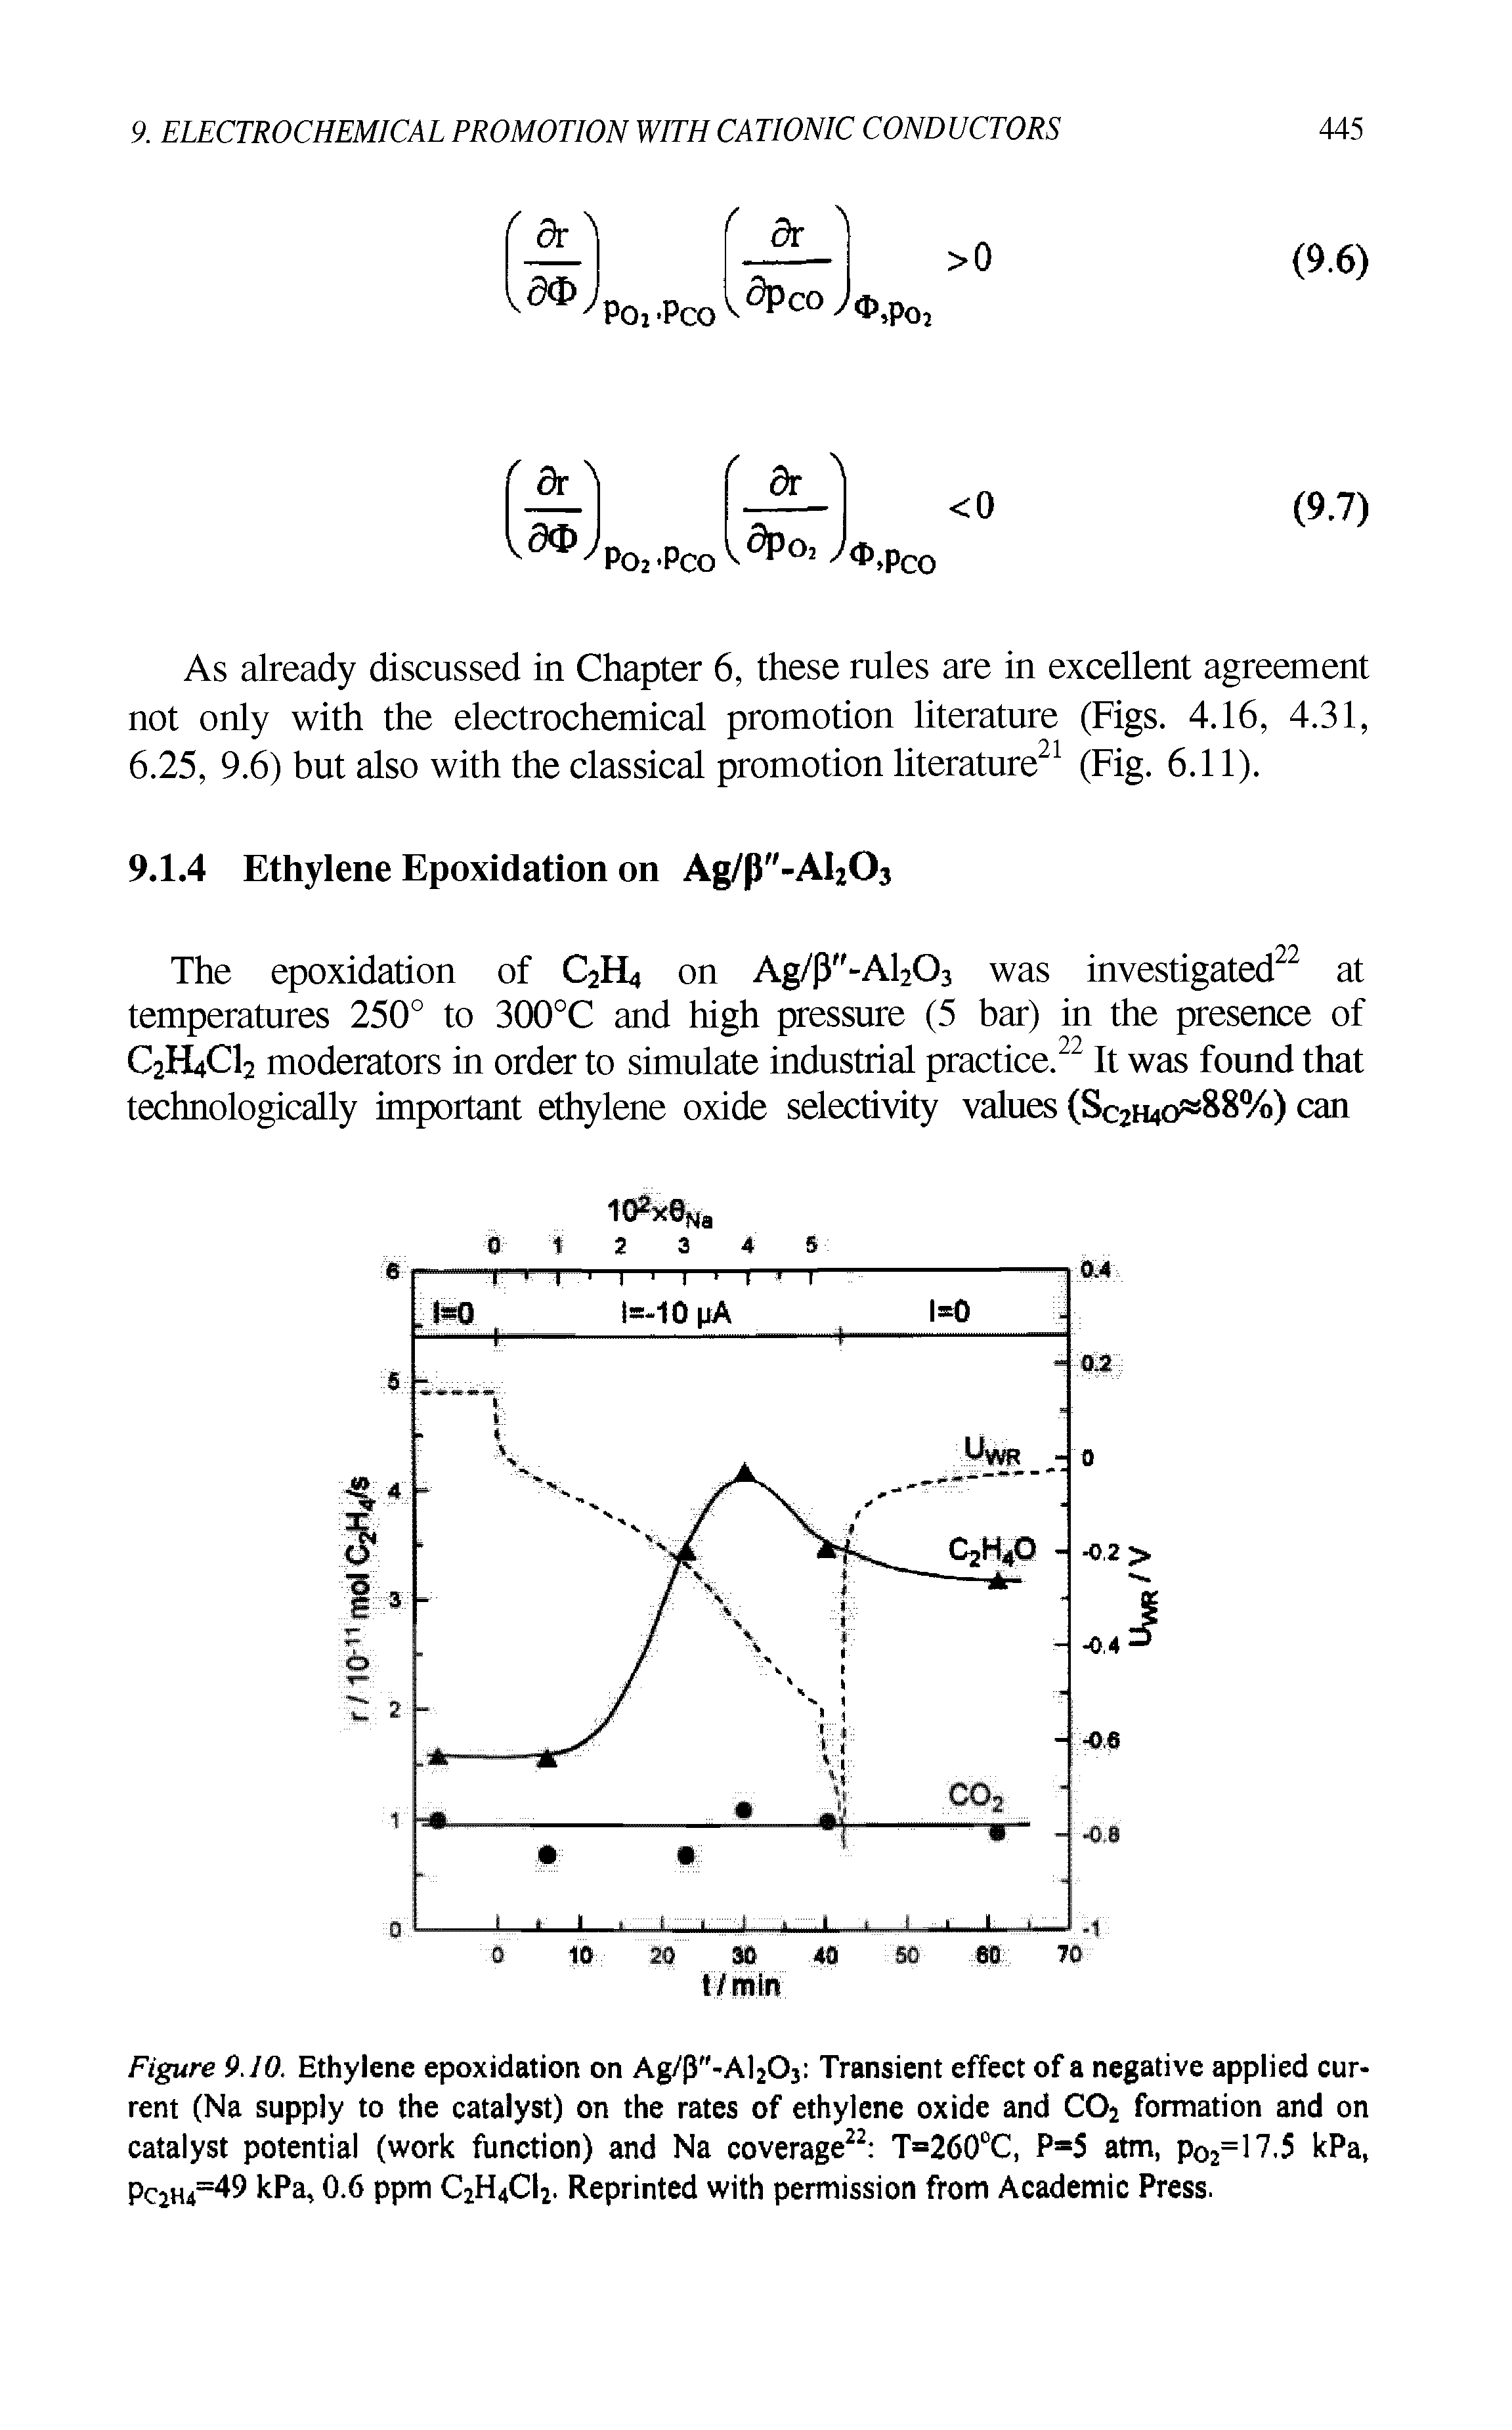 Figure 9.10. Ethylene epoxidation on Ag/p"-Al203 Transient effect of a negative applied current (Na supply to the catalyst) on the rates of ethylene oxide and C02 formation and on catalyst potential (work function) and Na coverage22 T=260°C, P=5 atm, p02=17,5 kPa, Pc2H4=49 kPa, 0.6 ppm C2H4CI2. Reprinted with permission from Academic Press.